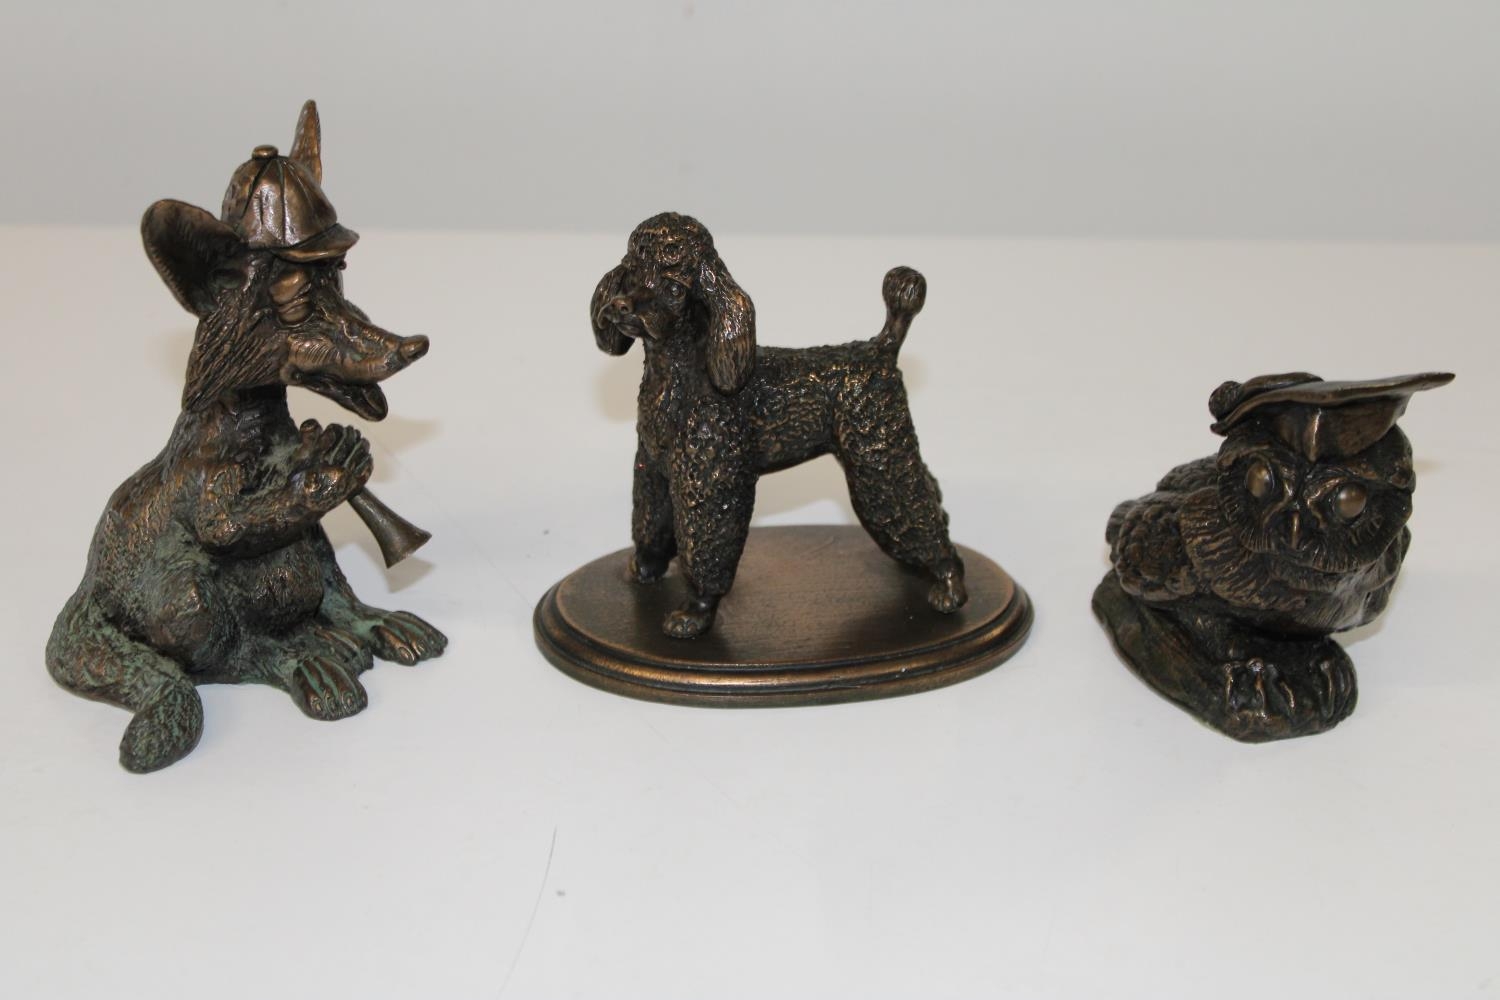 Three small Jeanne Rynhart sculptures hand finished in cold cast bronze. Largest 14cm tall